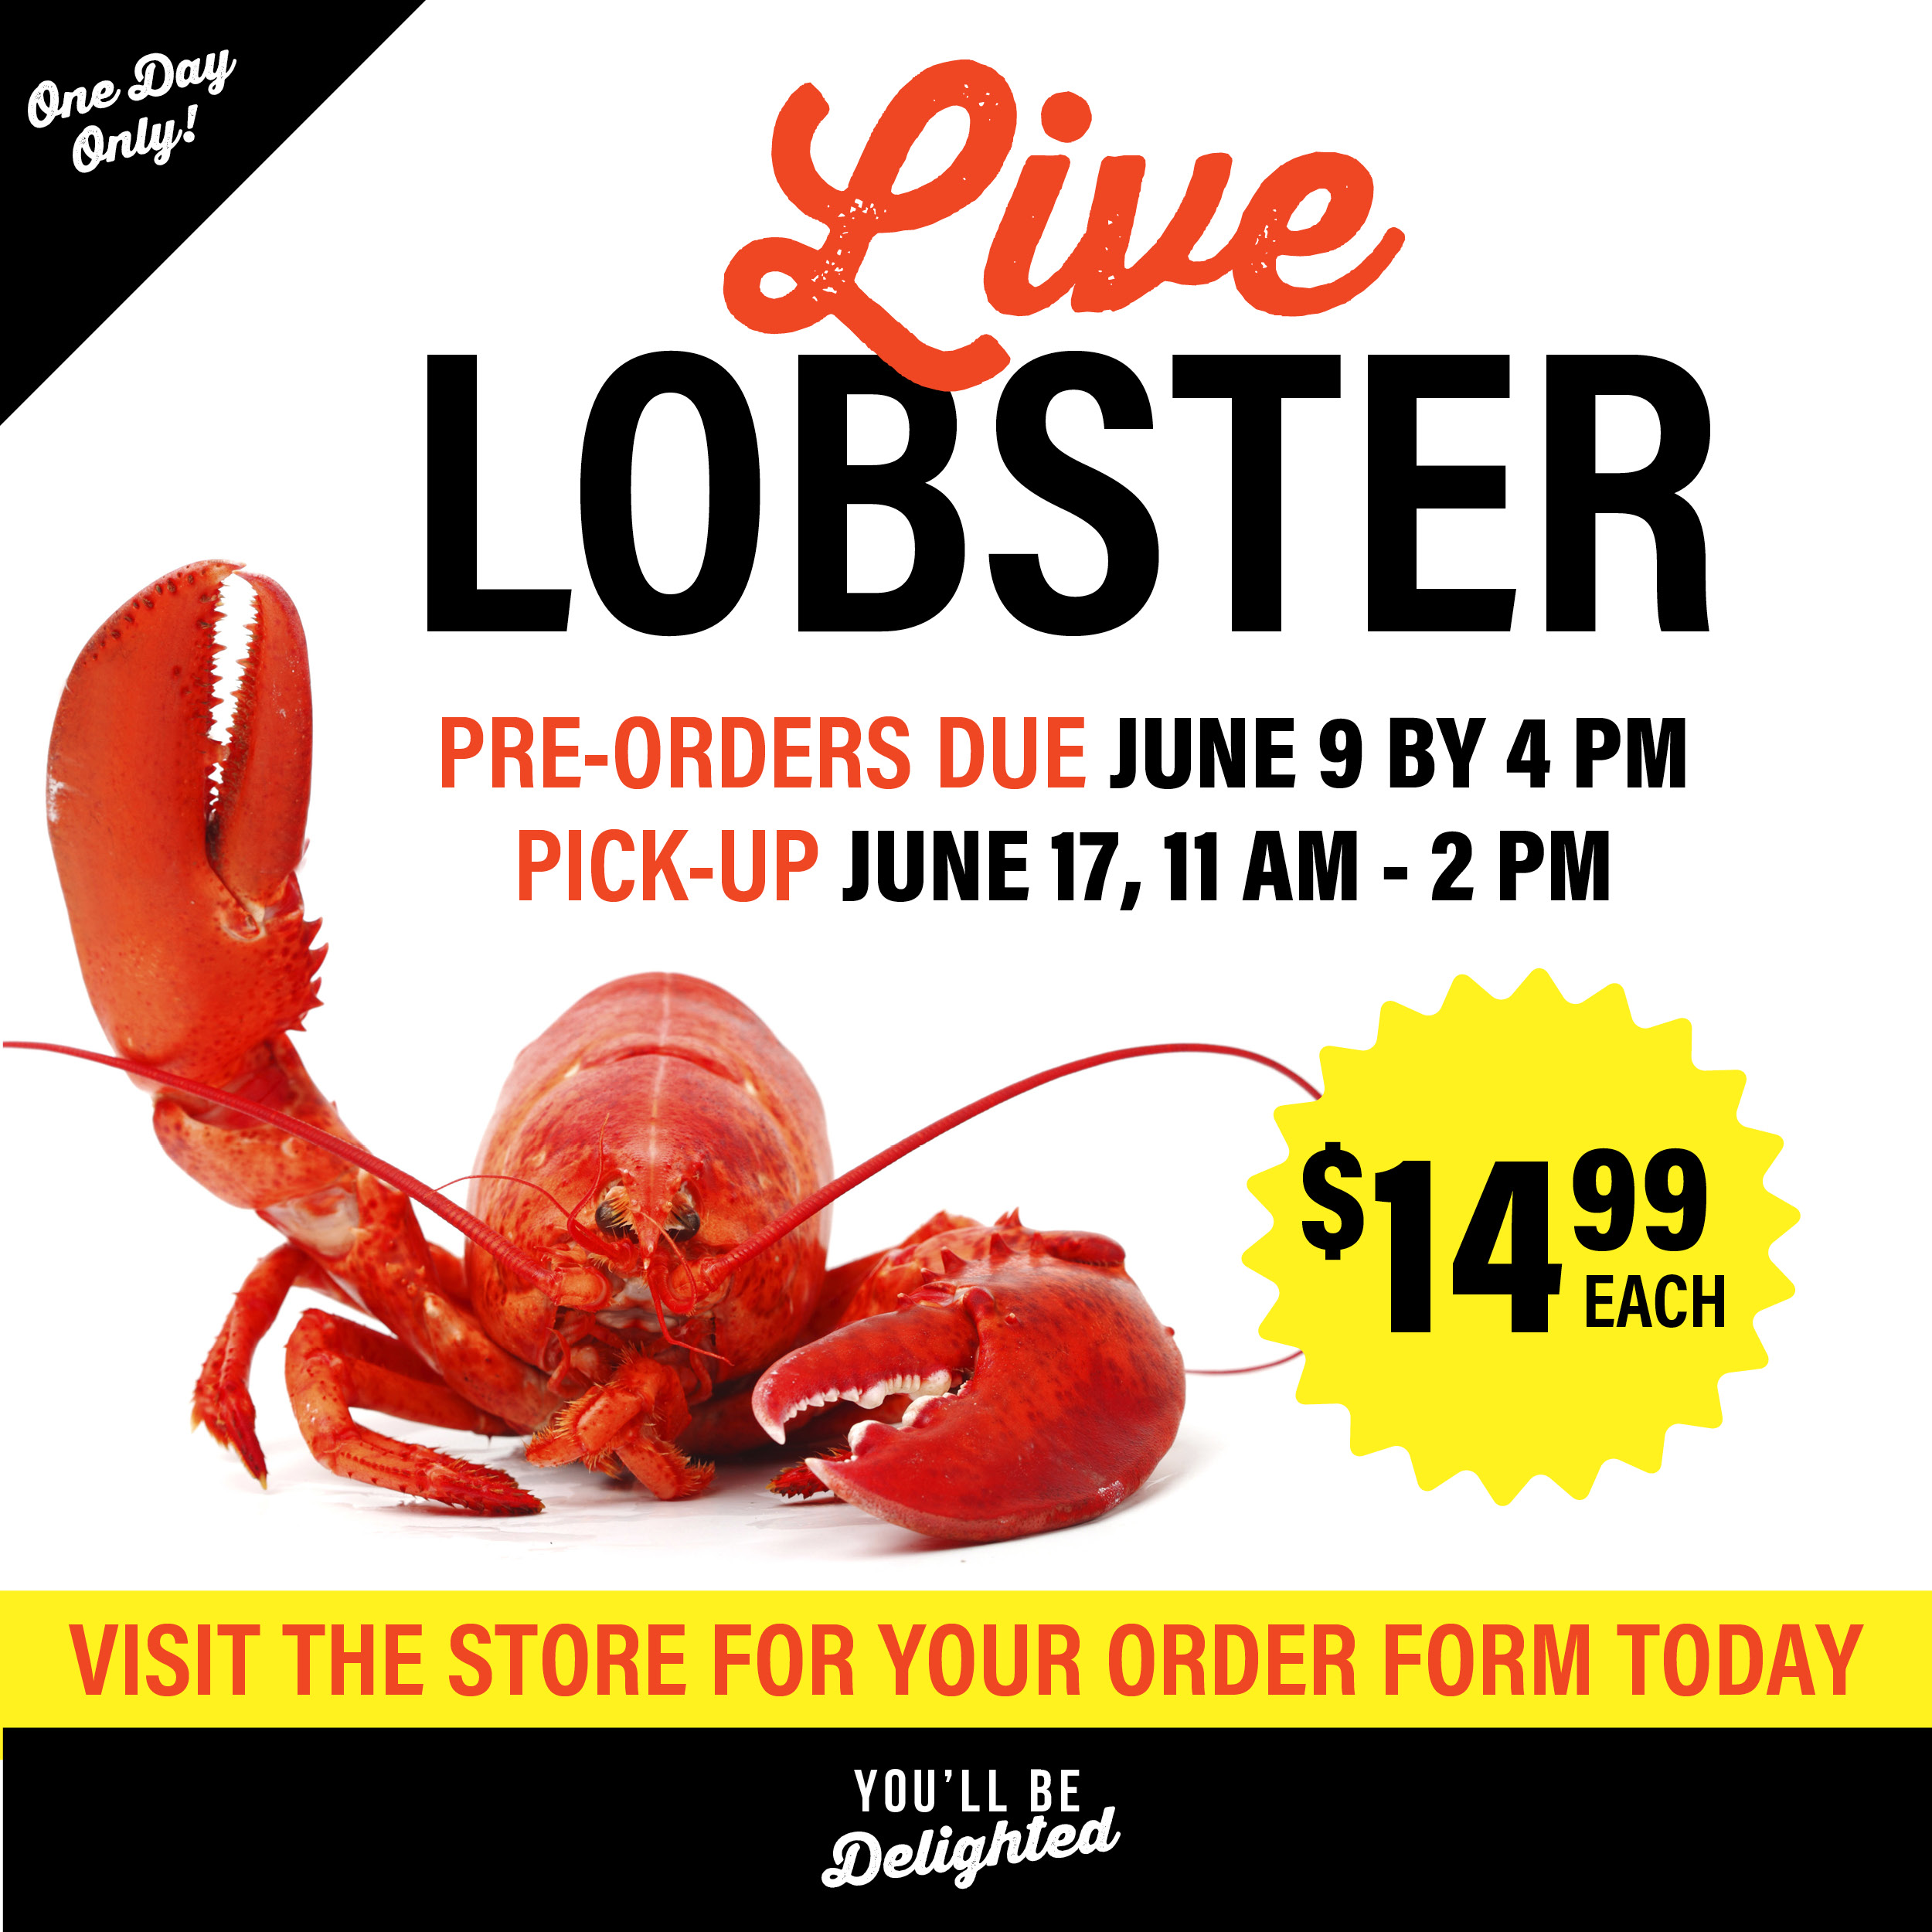 Live Lobster! Pre-orders due June 9th by 4pm. Pock-up June 17, 11am-2pm. $14.99 each, visit the store for your order form today!